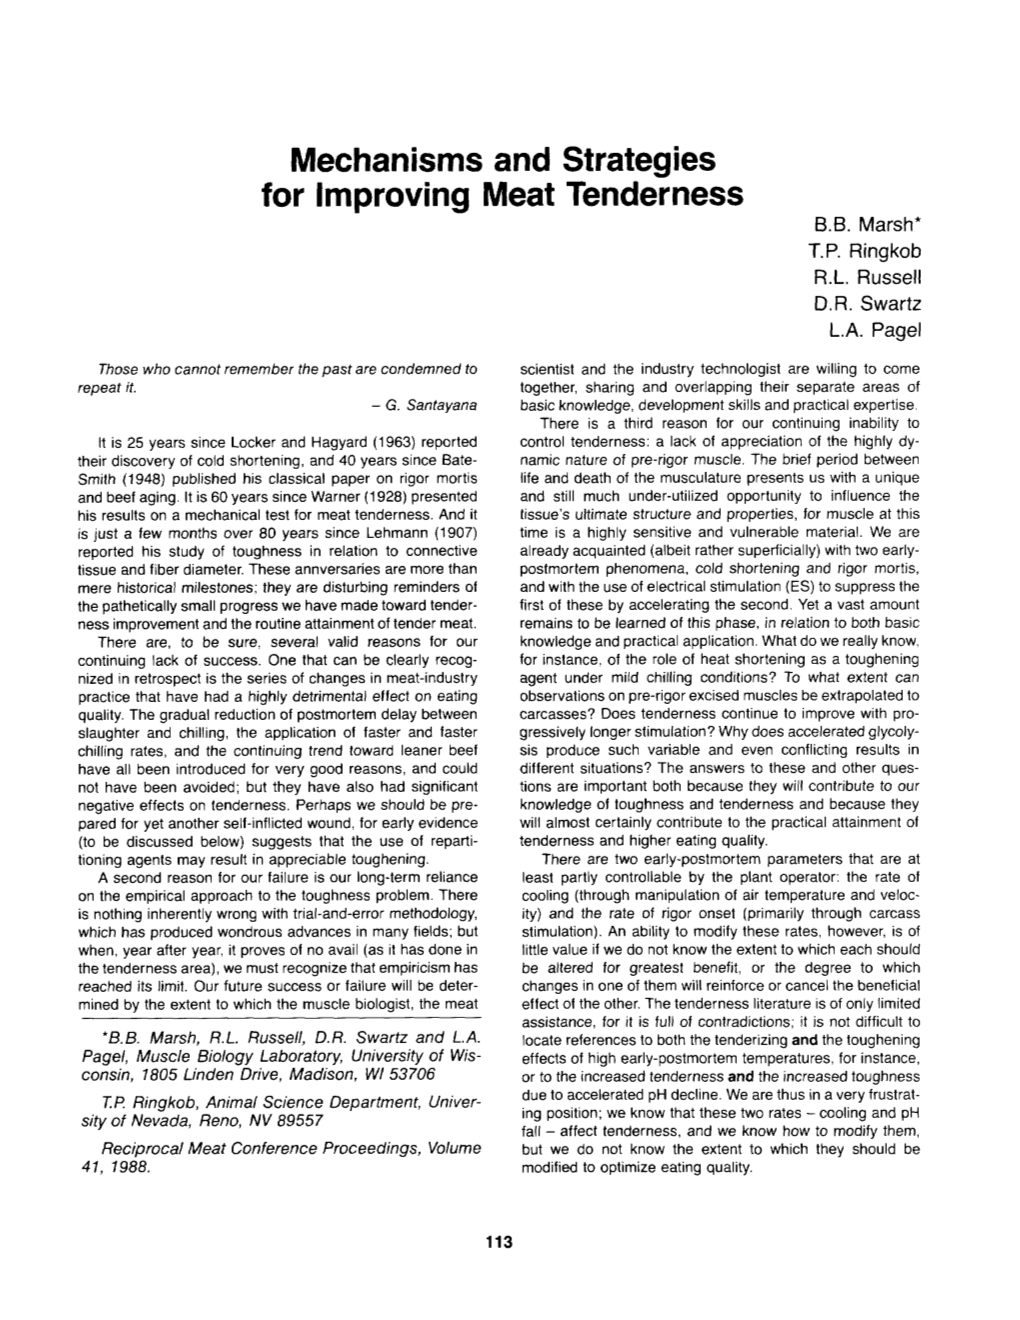 Mechanisms and Strategies for Improving Meat Tenderness B.B